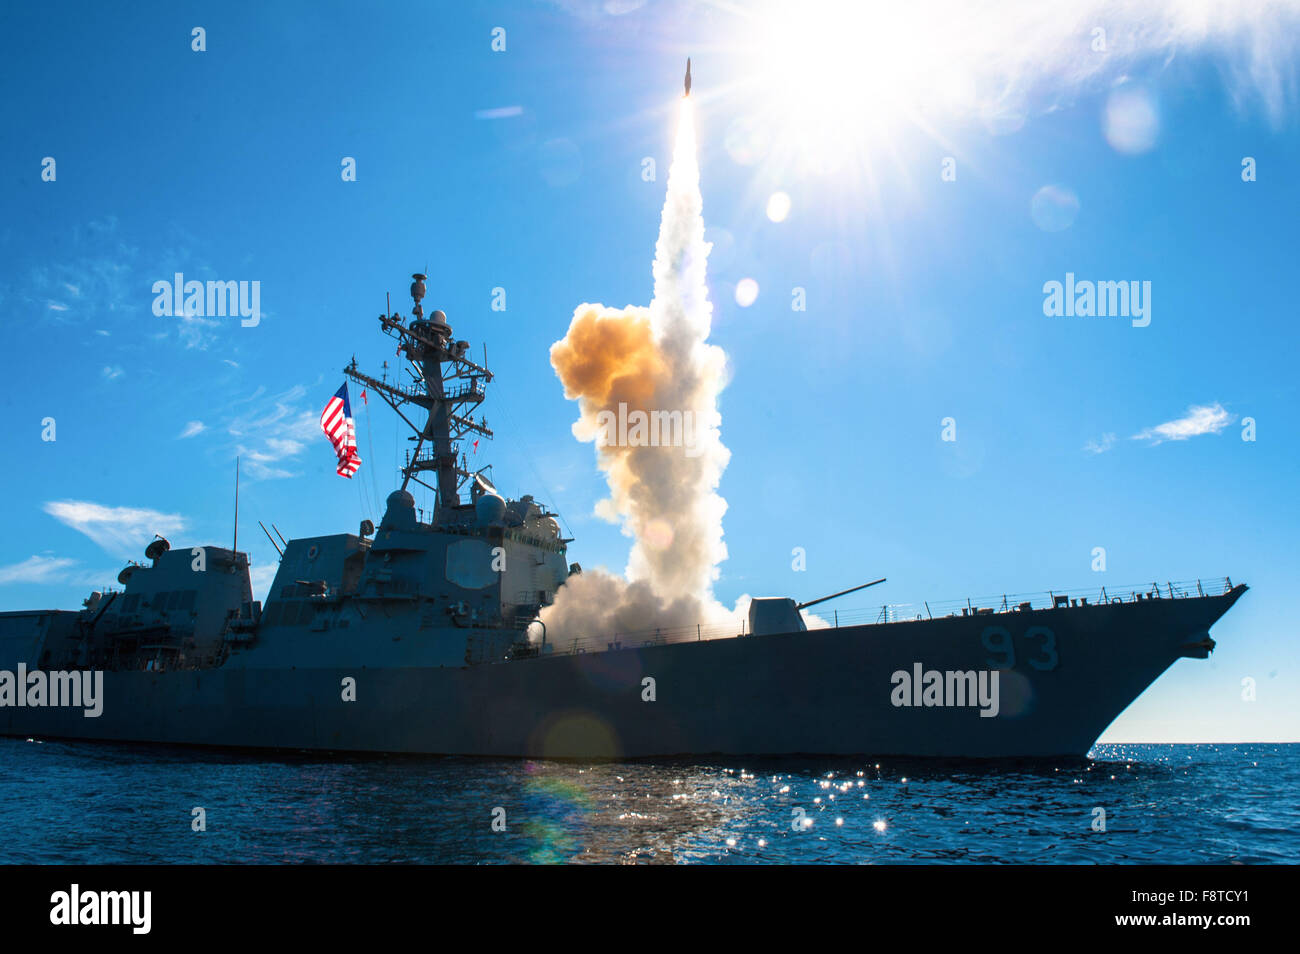 The guided-missile destroyer USS Chung-Hoon (DDG 93) fires an SM-2 missile during a live-fire exercise. Stock Photo